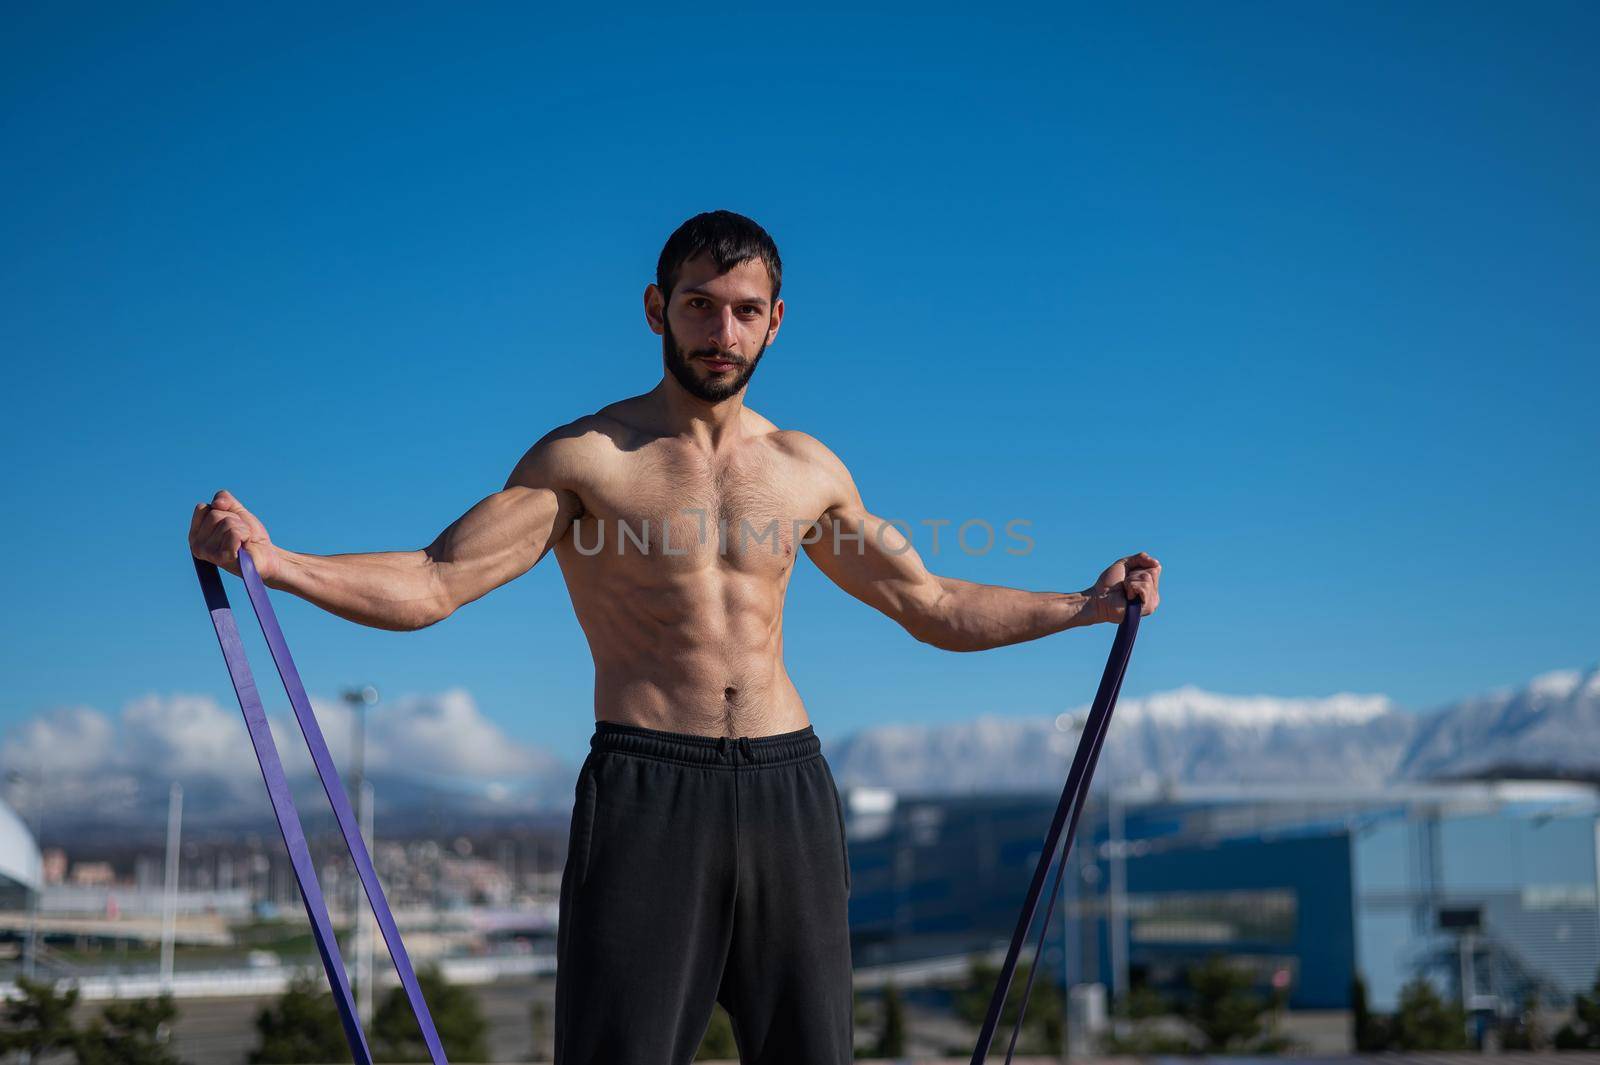 Shirtless man doing exercise with rubber bands outdoors